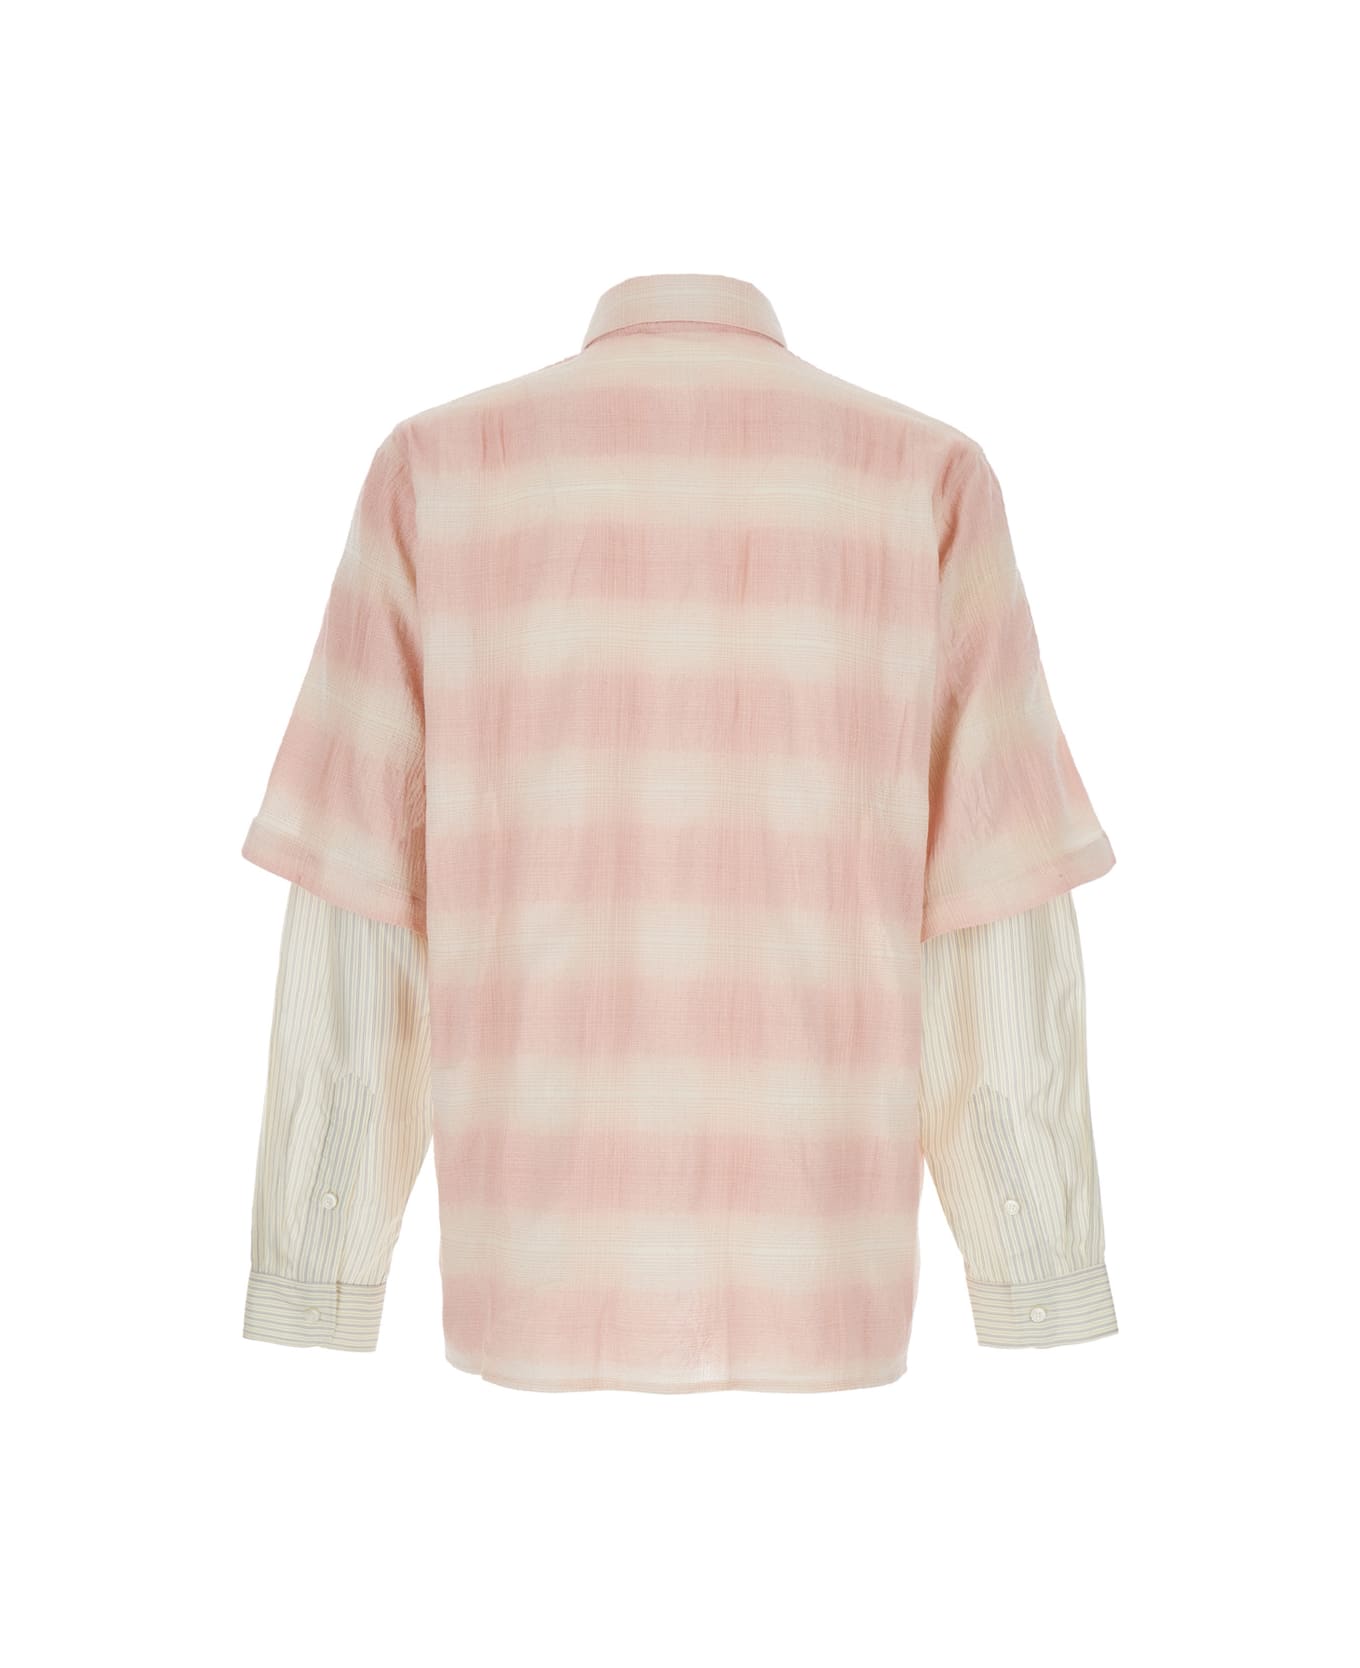 AMIRI Pink And White Shirt With Double-layer Sleeves In Cotton Blend Man - Pink シャツ